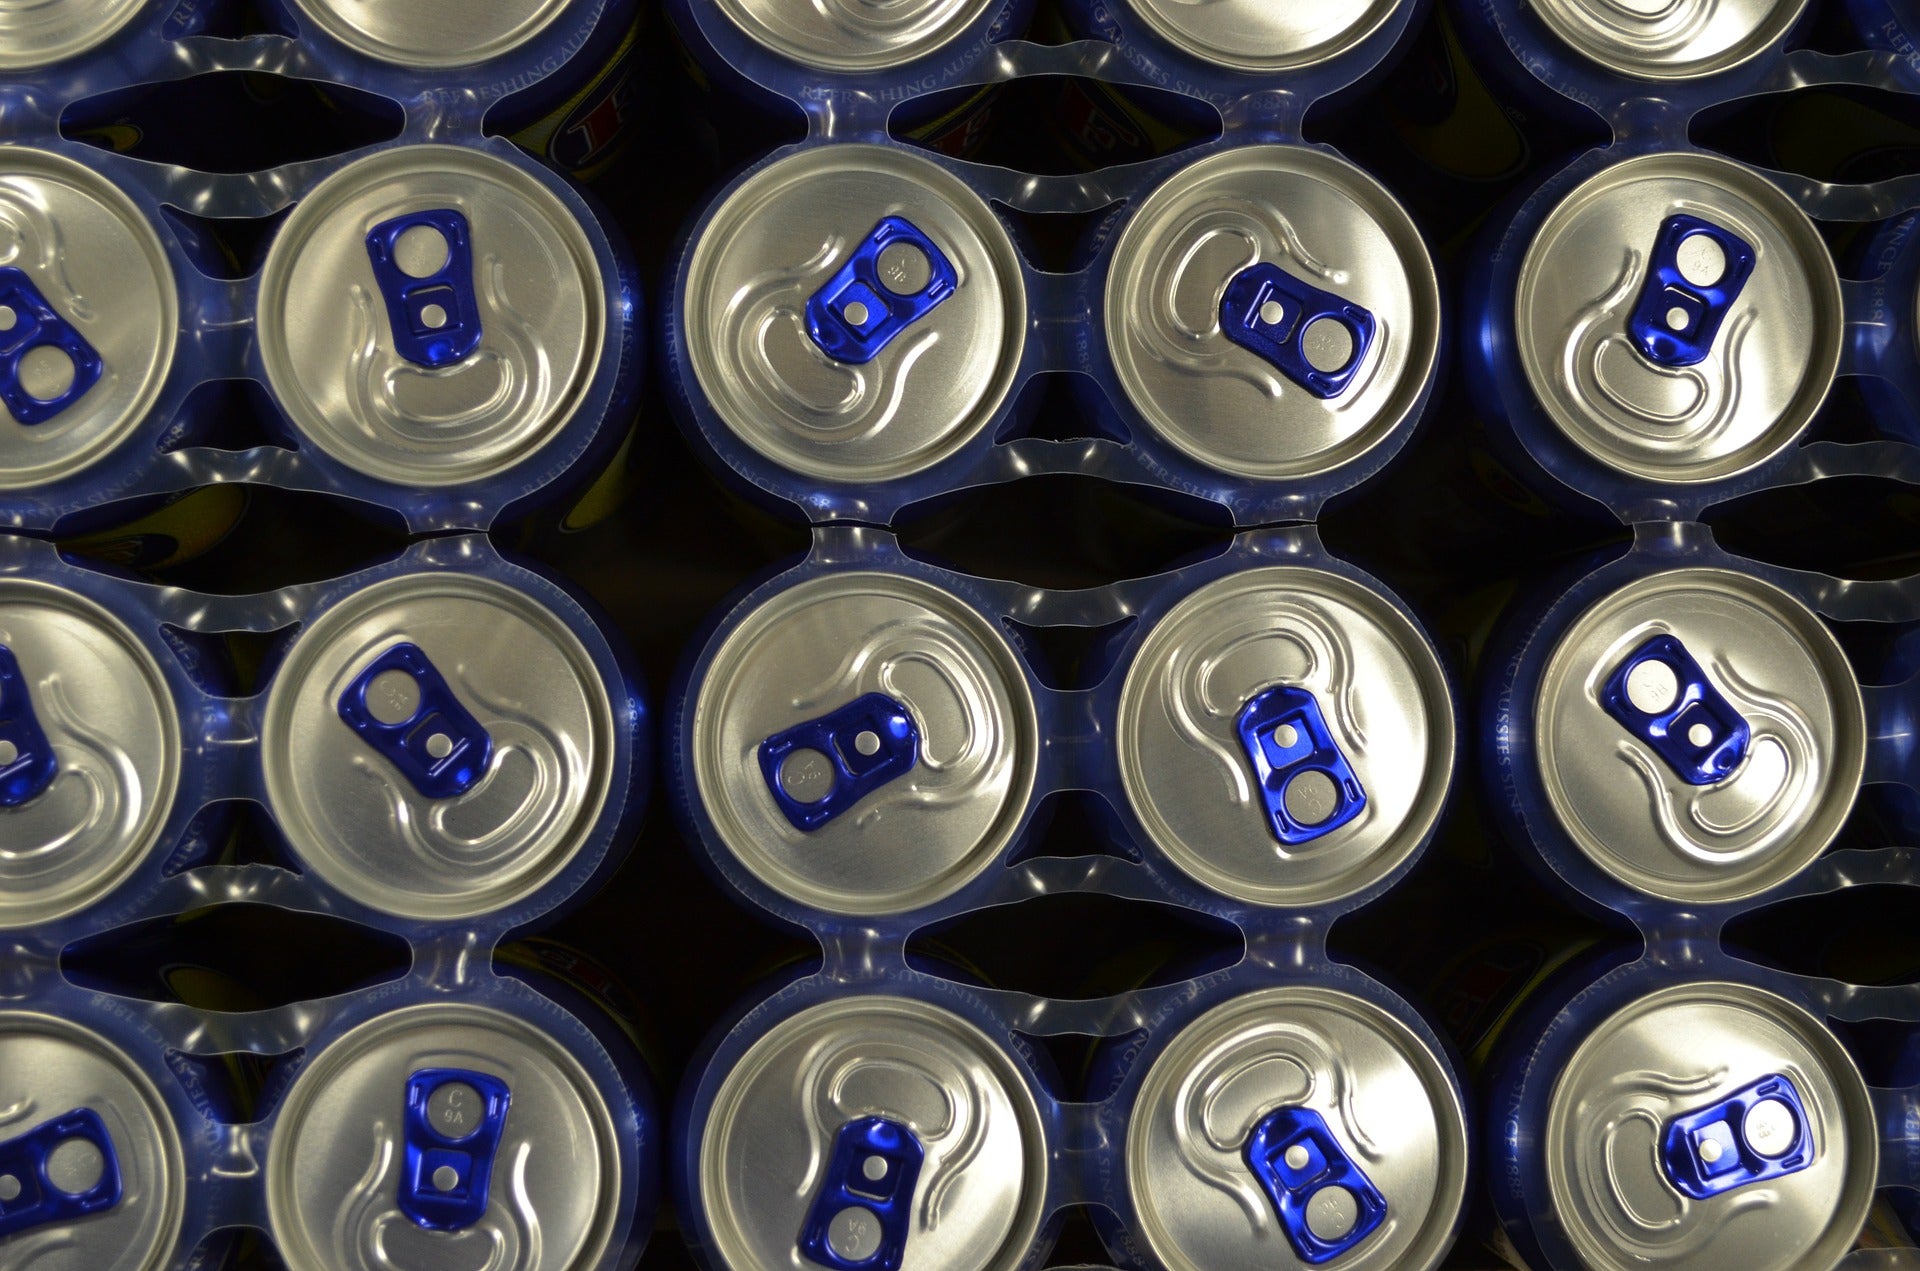 Ball shares plans for can manufacturing facilities in UK and Russia